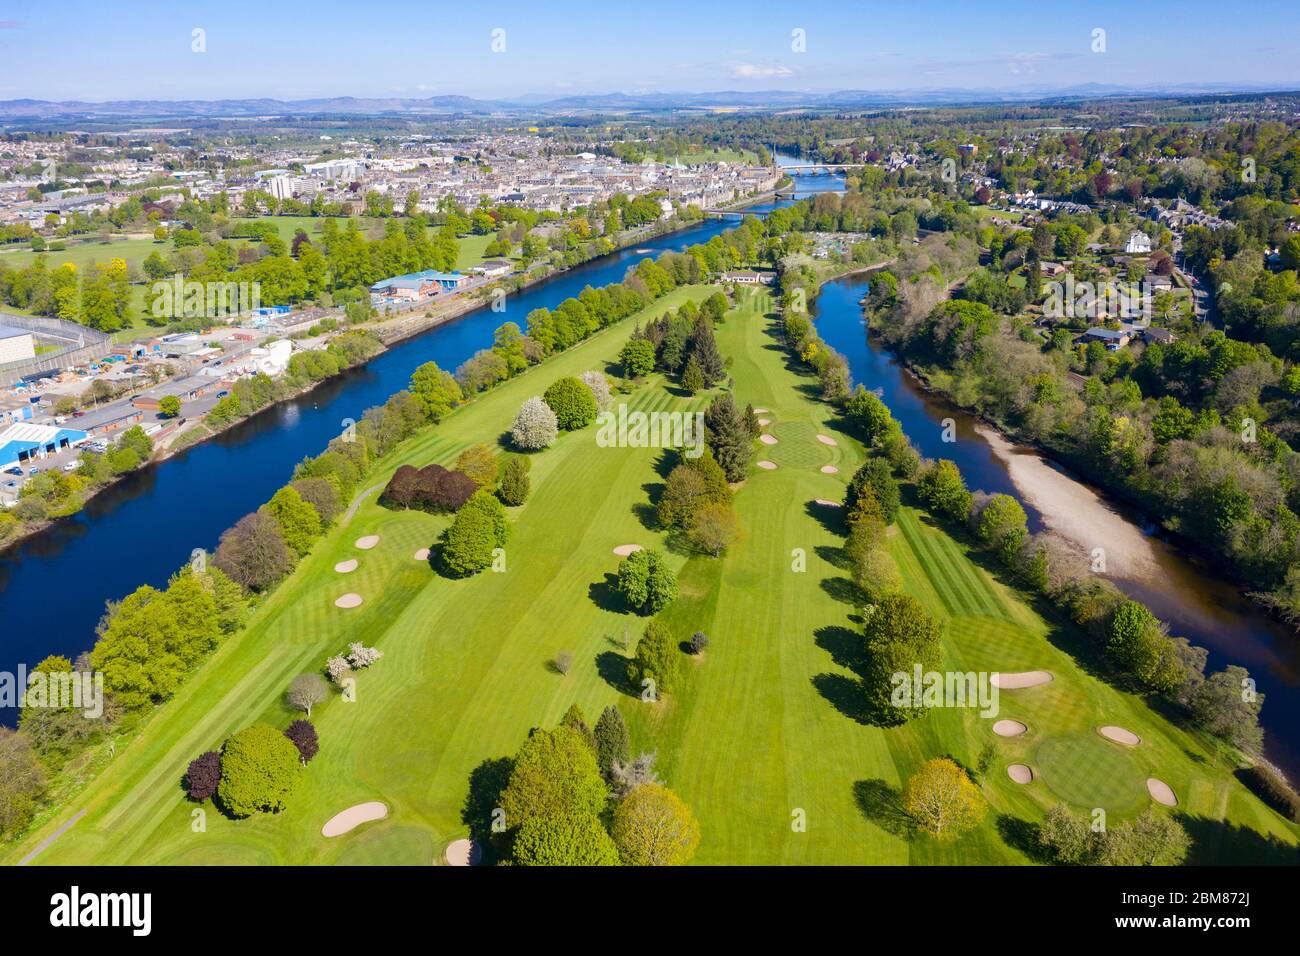 Aerial view of King James VI Golf Club golf course closed during Covid-19 lockdown, on Moncreiffe Island in River Tay, Perth, Scotland, UK Stock Photo